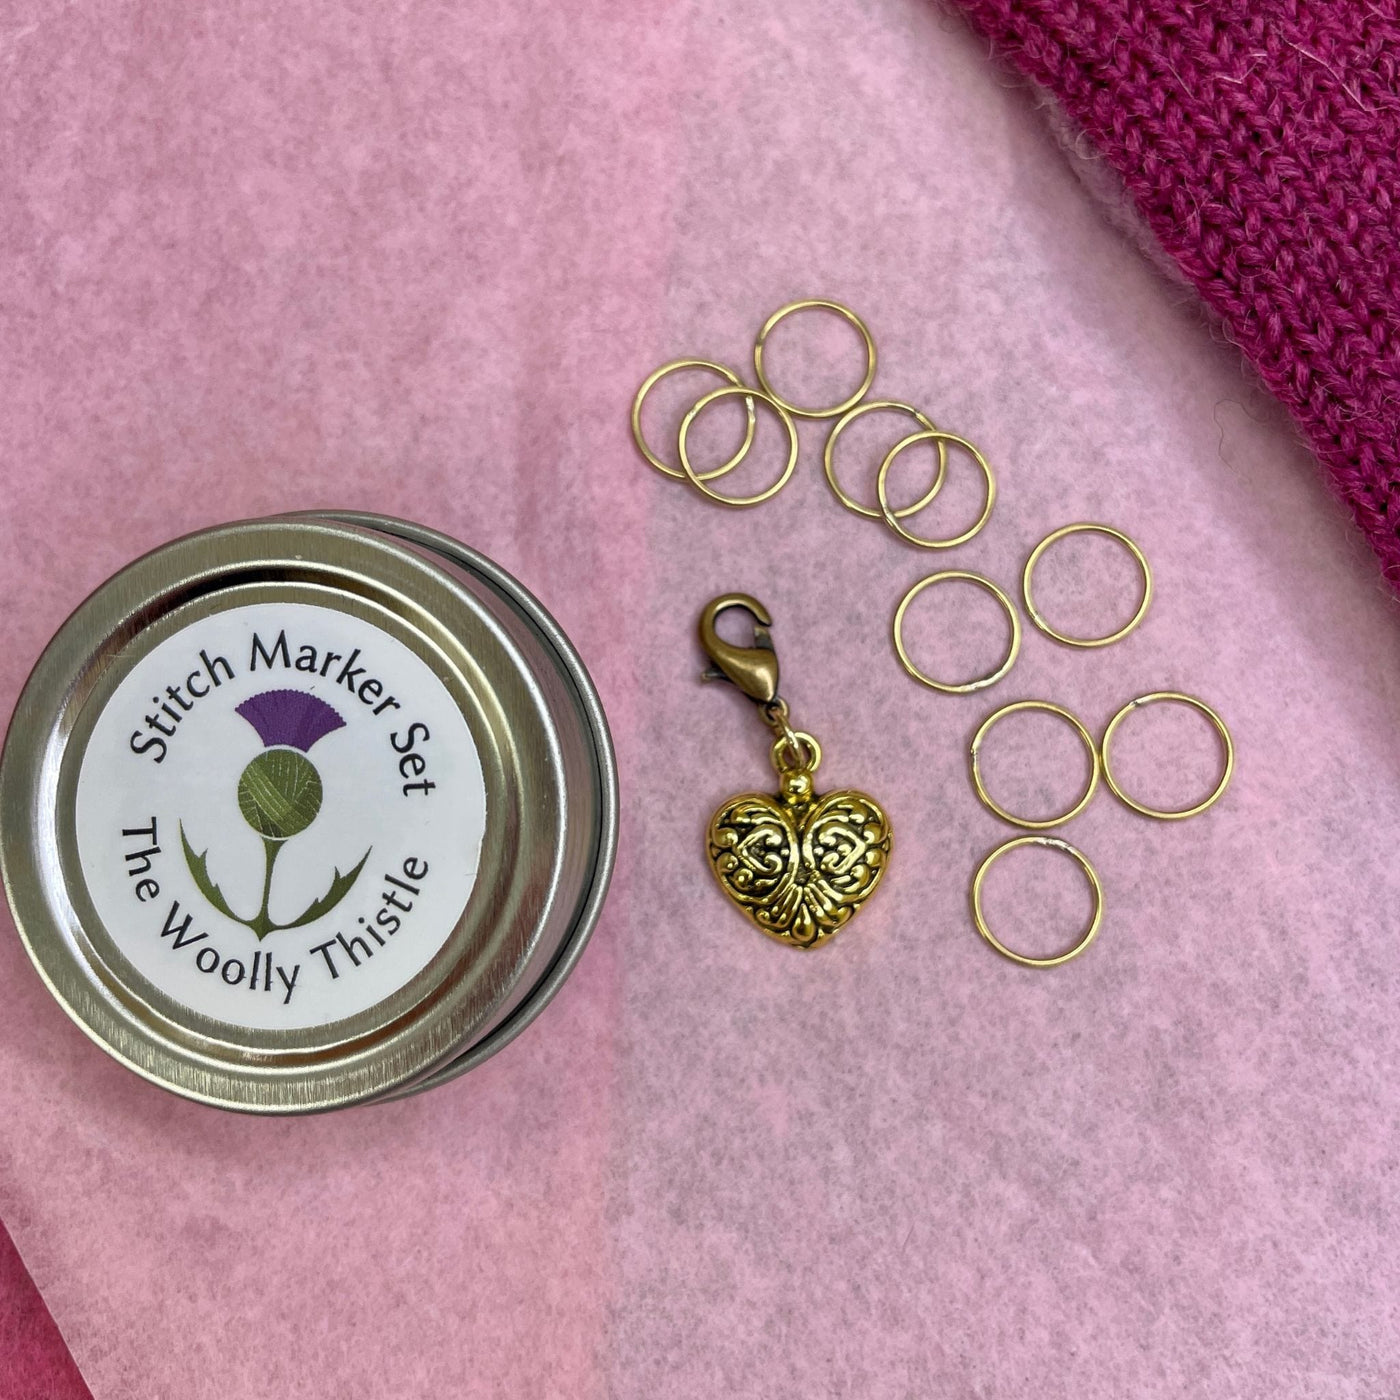 The Woolly Thistle tin shown with a golden heart stitch marker charm and stitch markers on pink background.